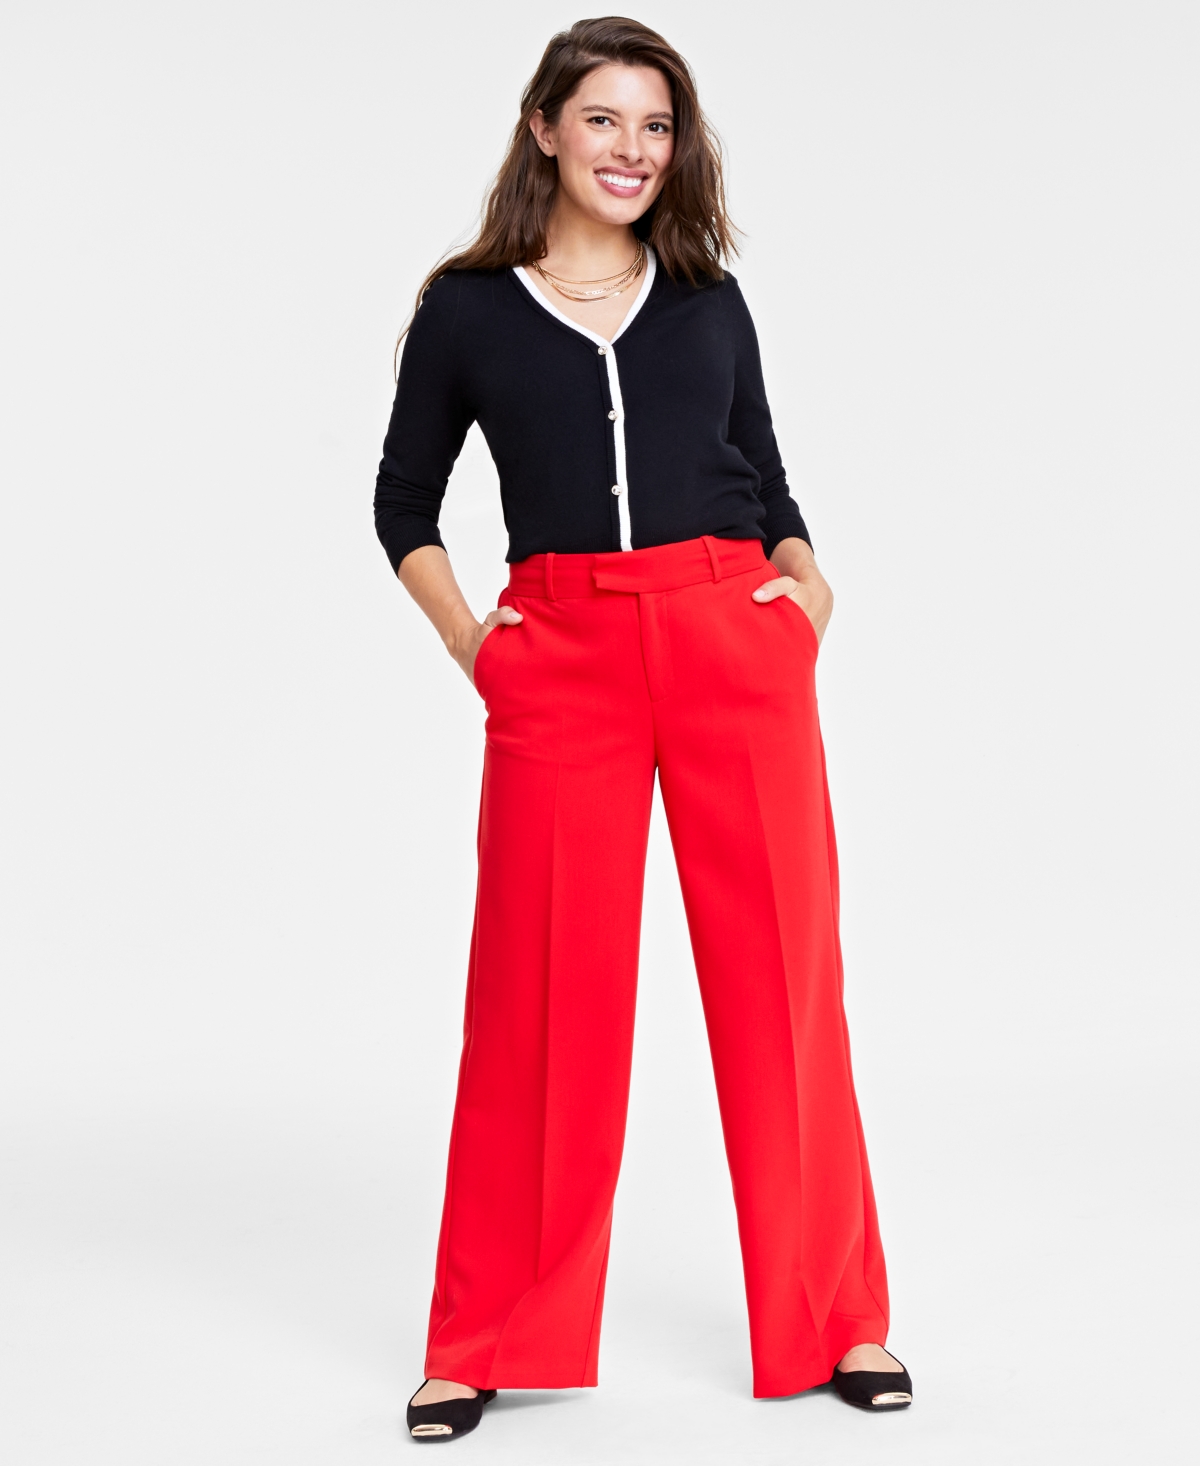 Women's Double-Weave Wide-Leg Pants, Regular and Short Length, Created for Macy's - Chili